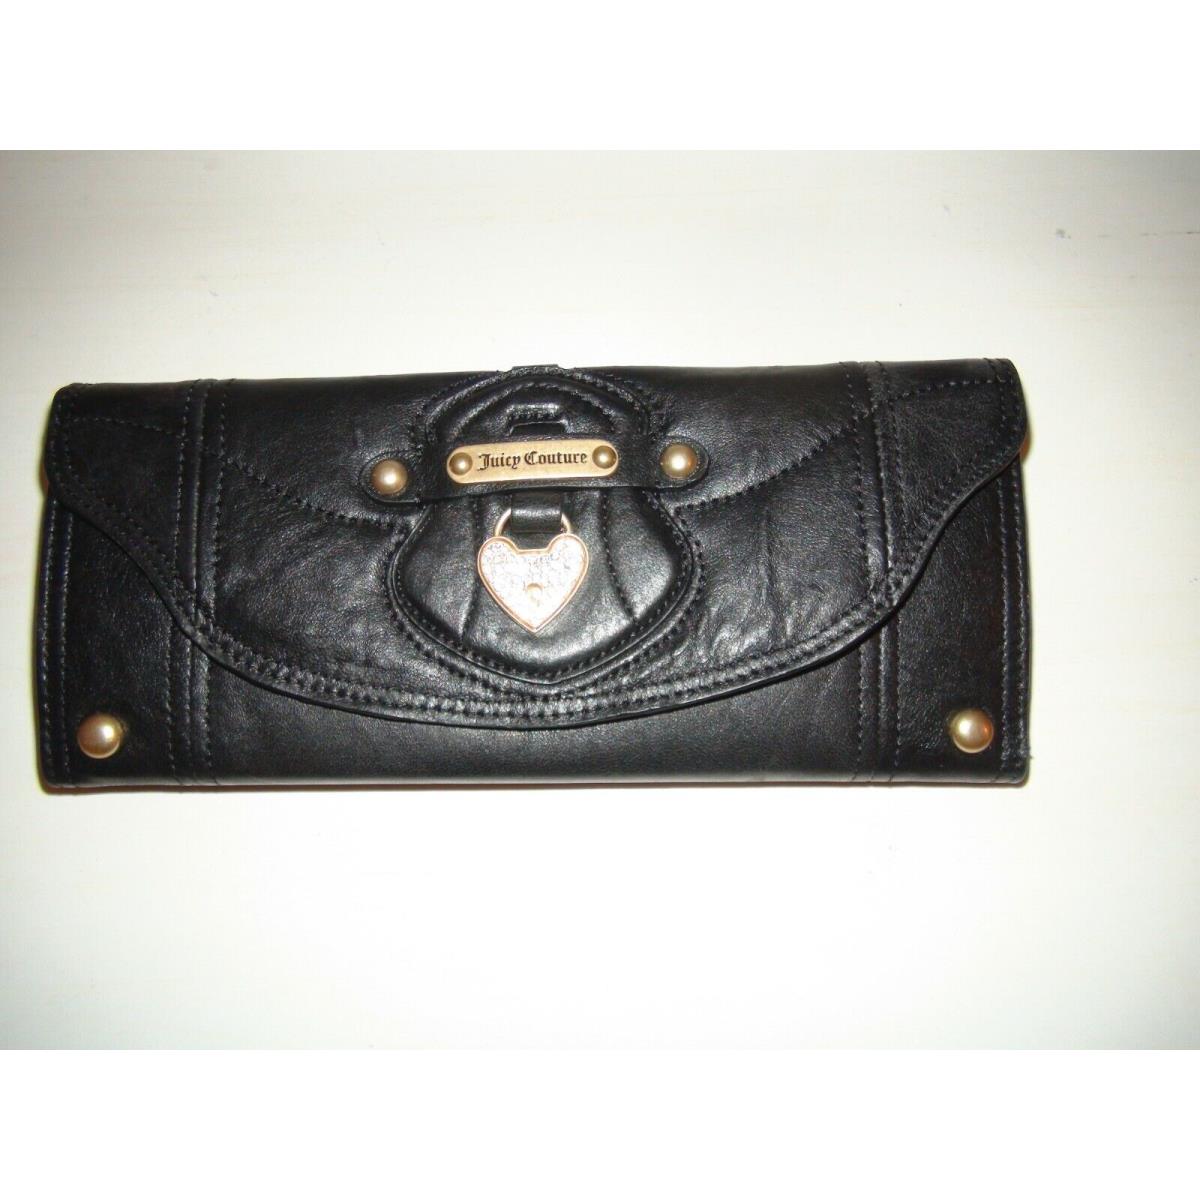 Juicy Couture Black Leather Elongated Clutch Pave Heart Wallet